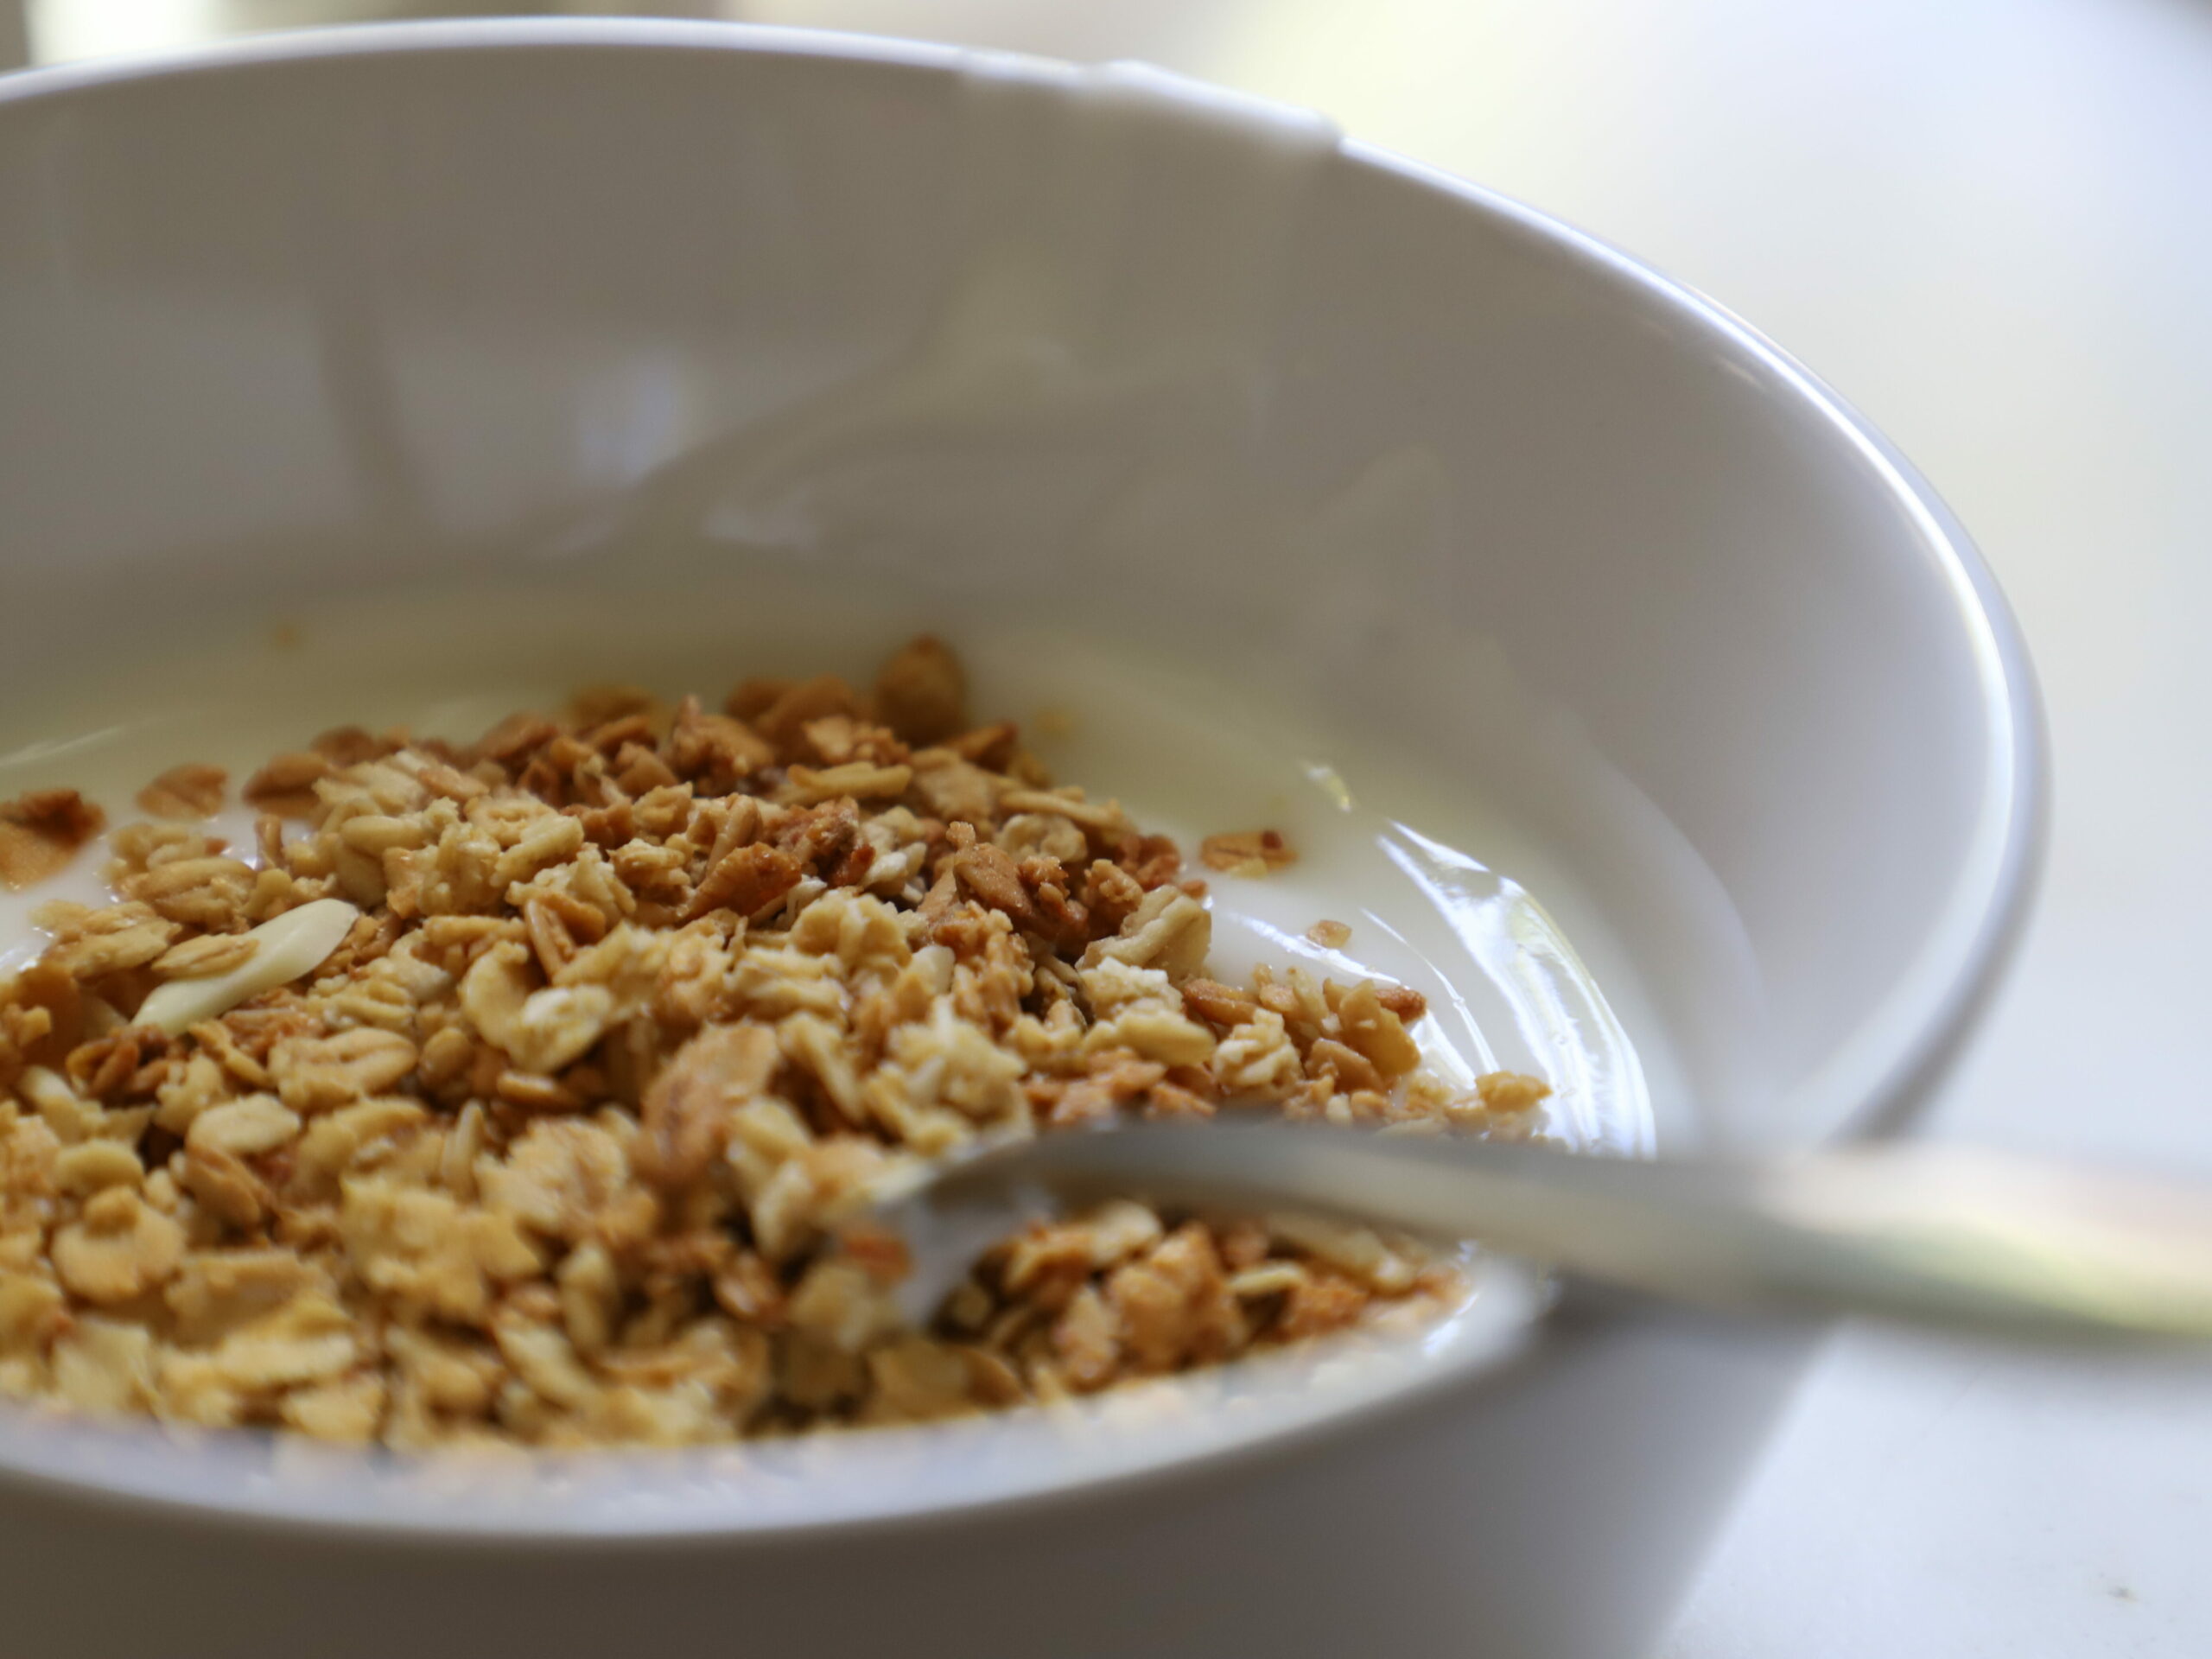 Picture of a bowl of yogurt with granola and a spoon